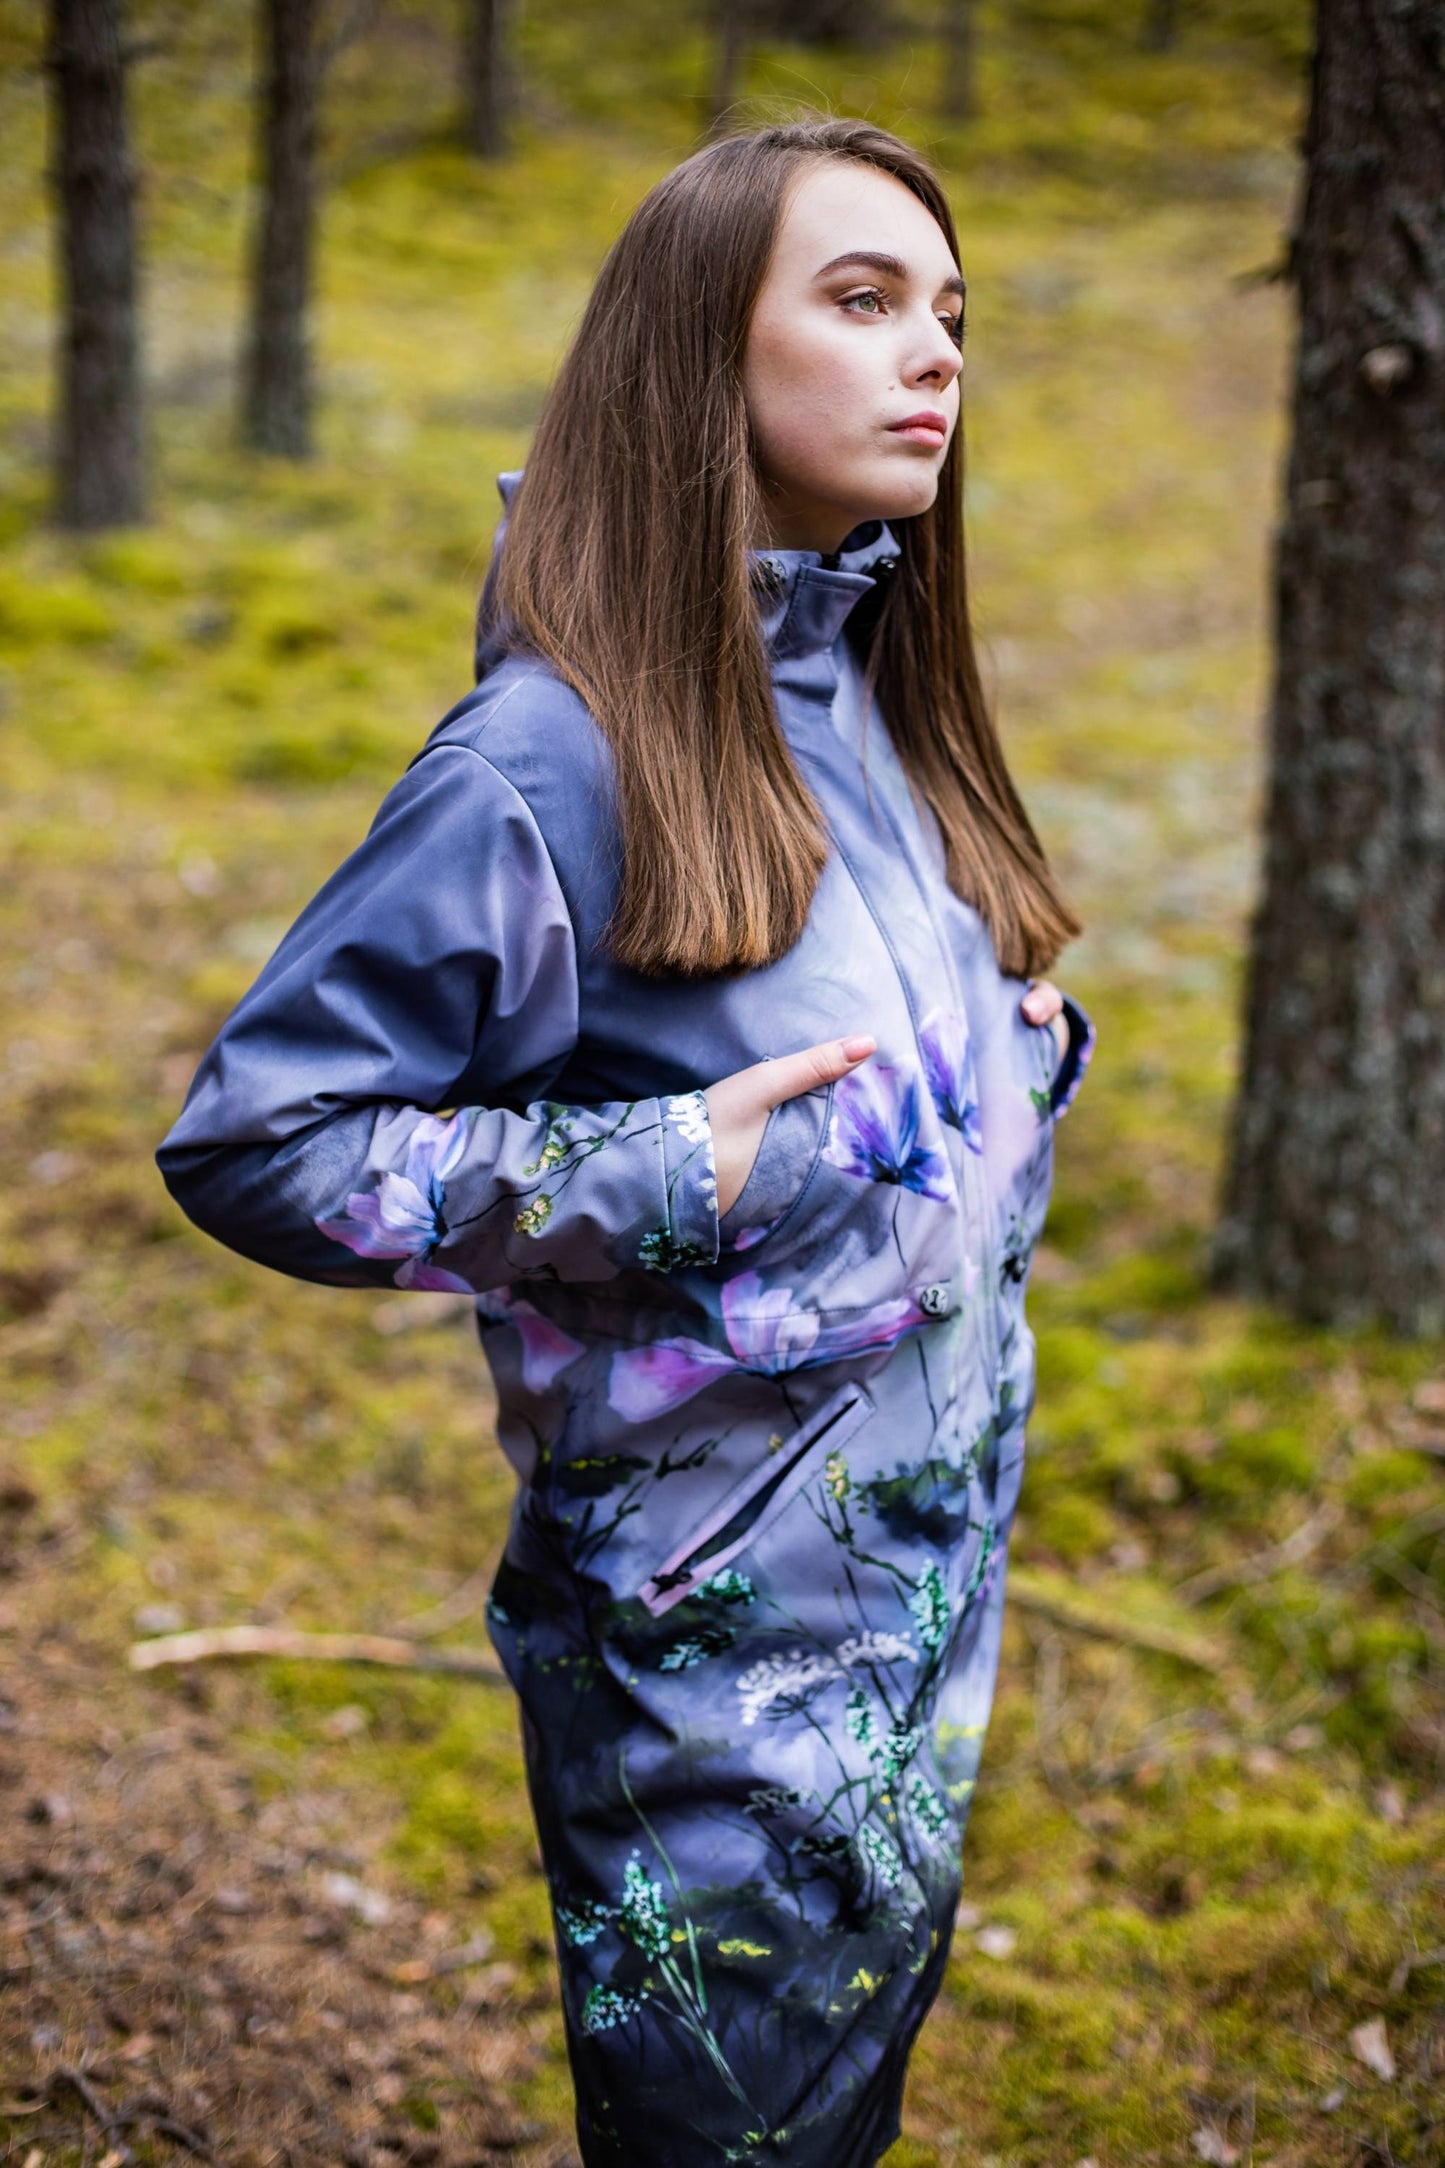 Softshell coat / parka with a print of a painted meadow